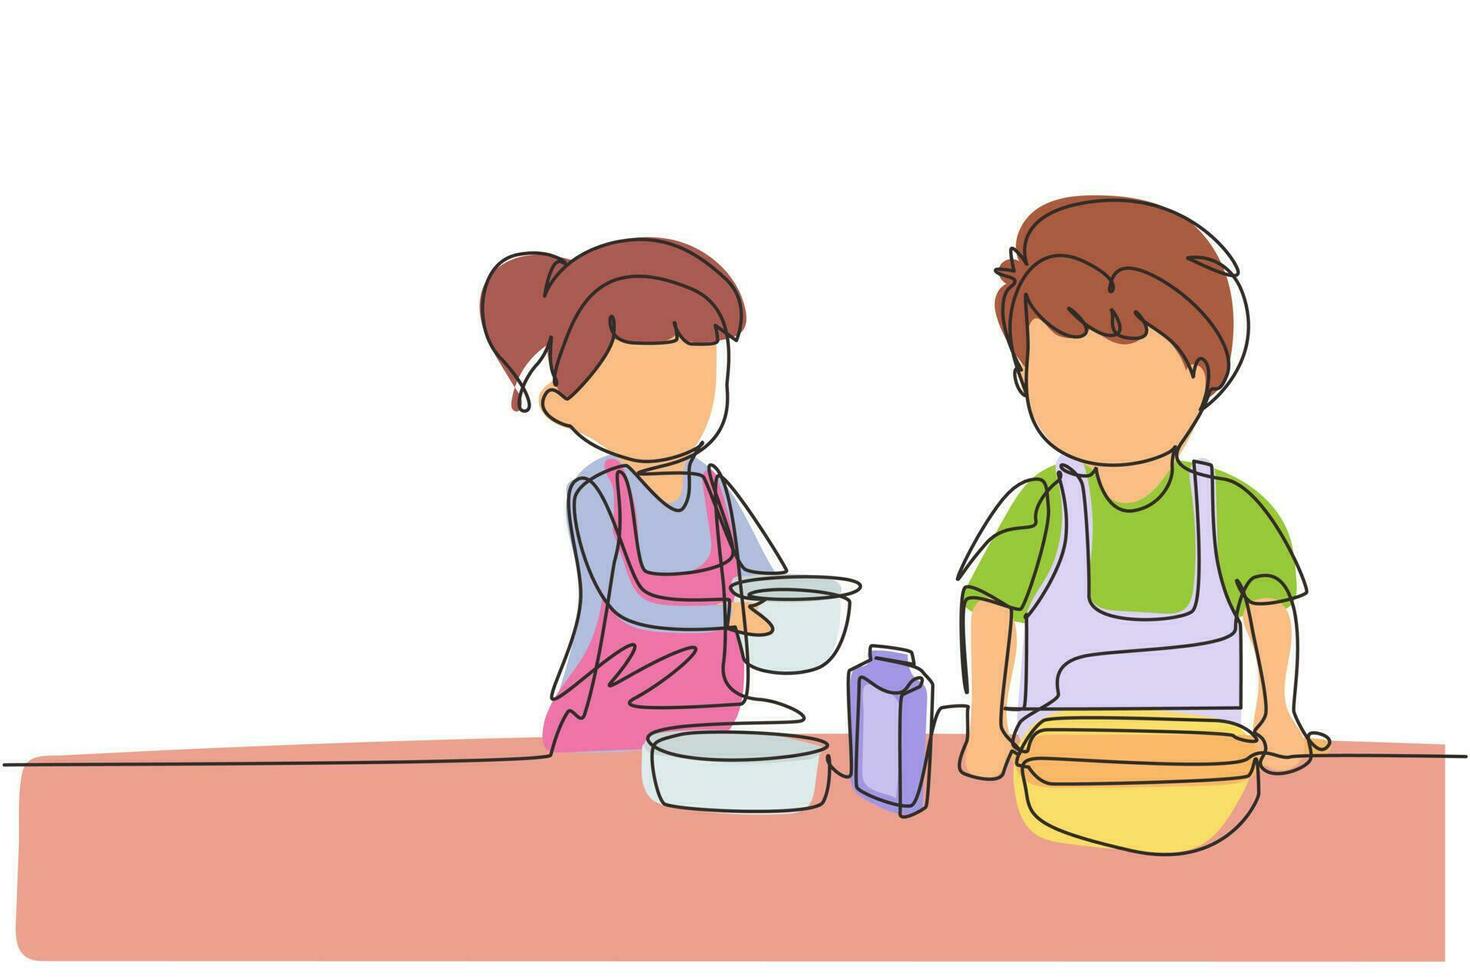 Continuous one line drawing siblings boy and girl baking together with rolling pin at kitchen counter. Happy kids making homemade bakery at home. Single line draw design vector graphic illustration